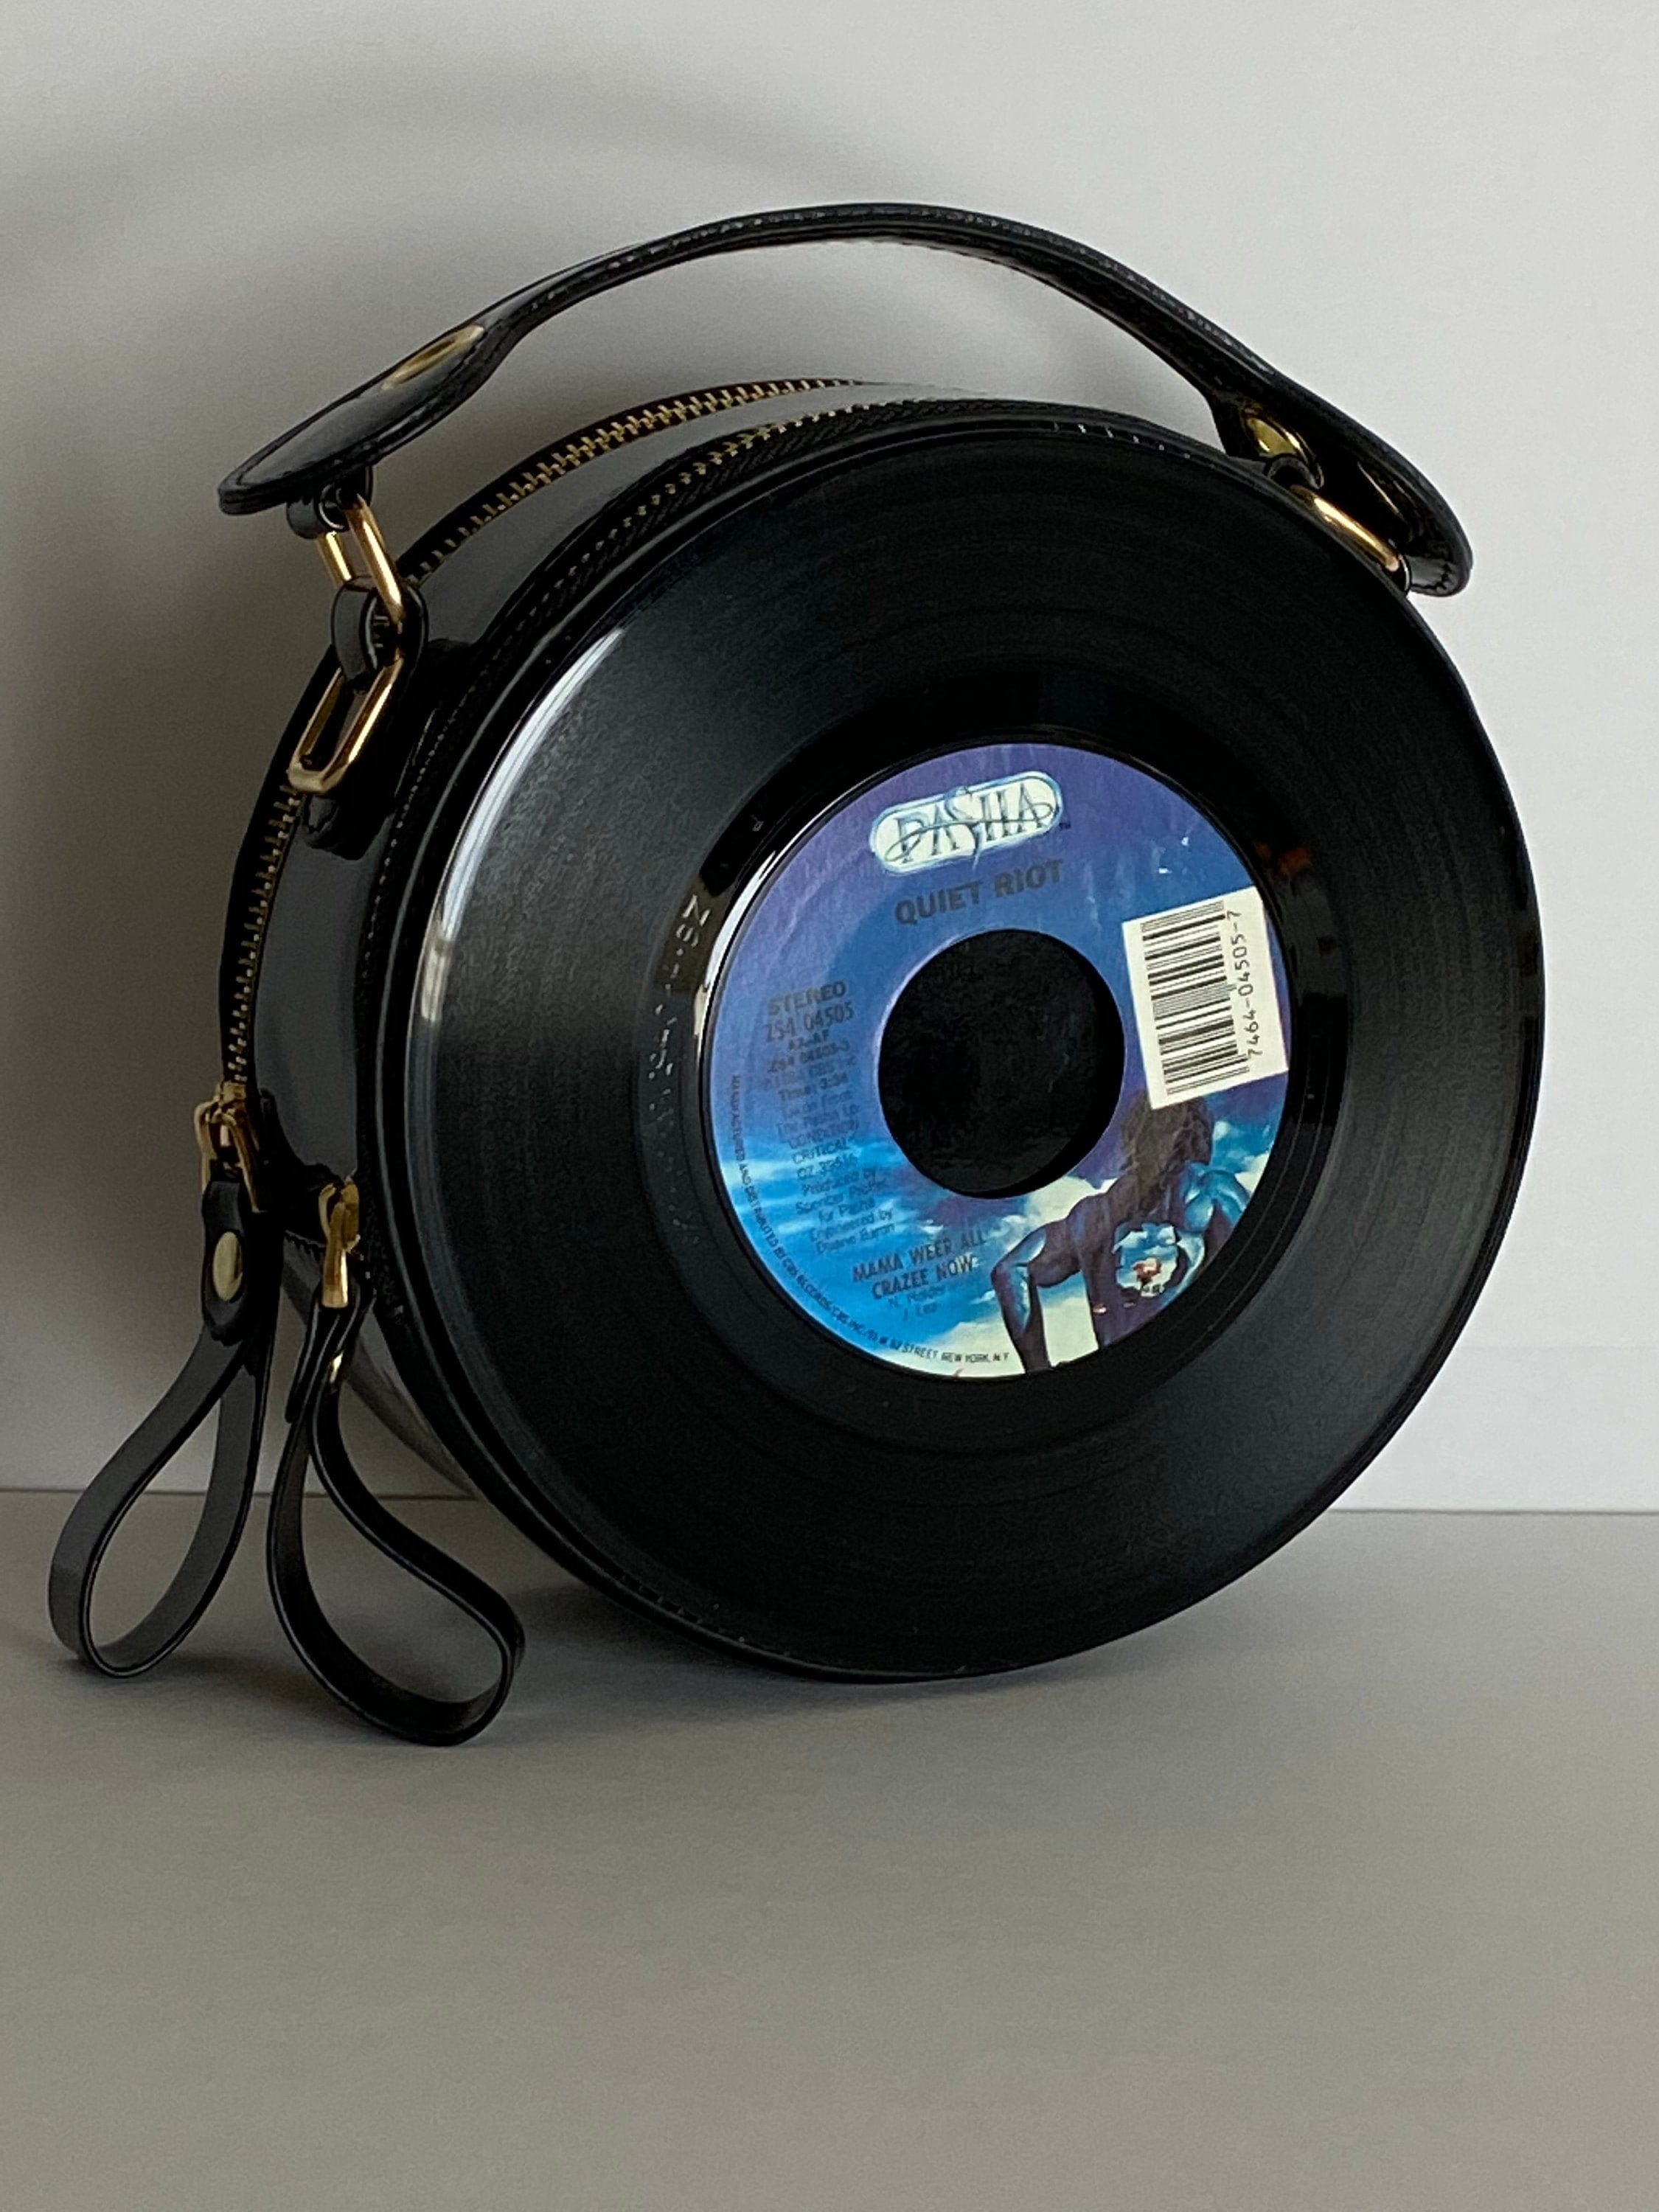 Vinyl Record Purse Accessory  Rock and roll artists, Vinyl records, Shell  purse